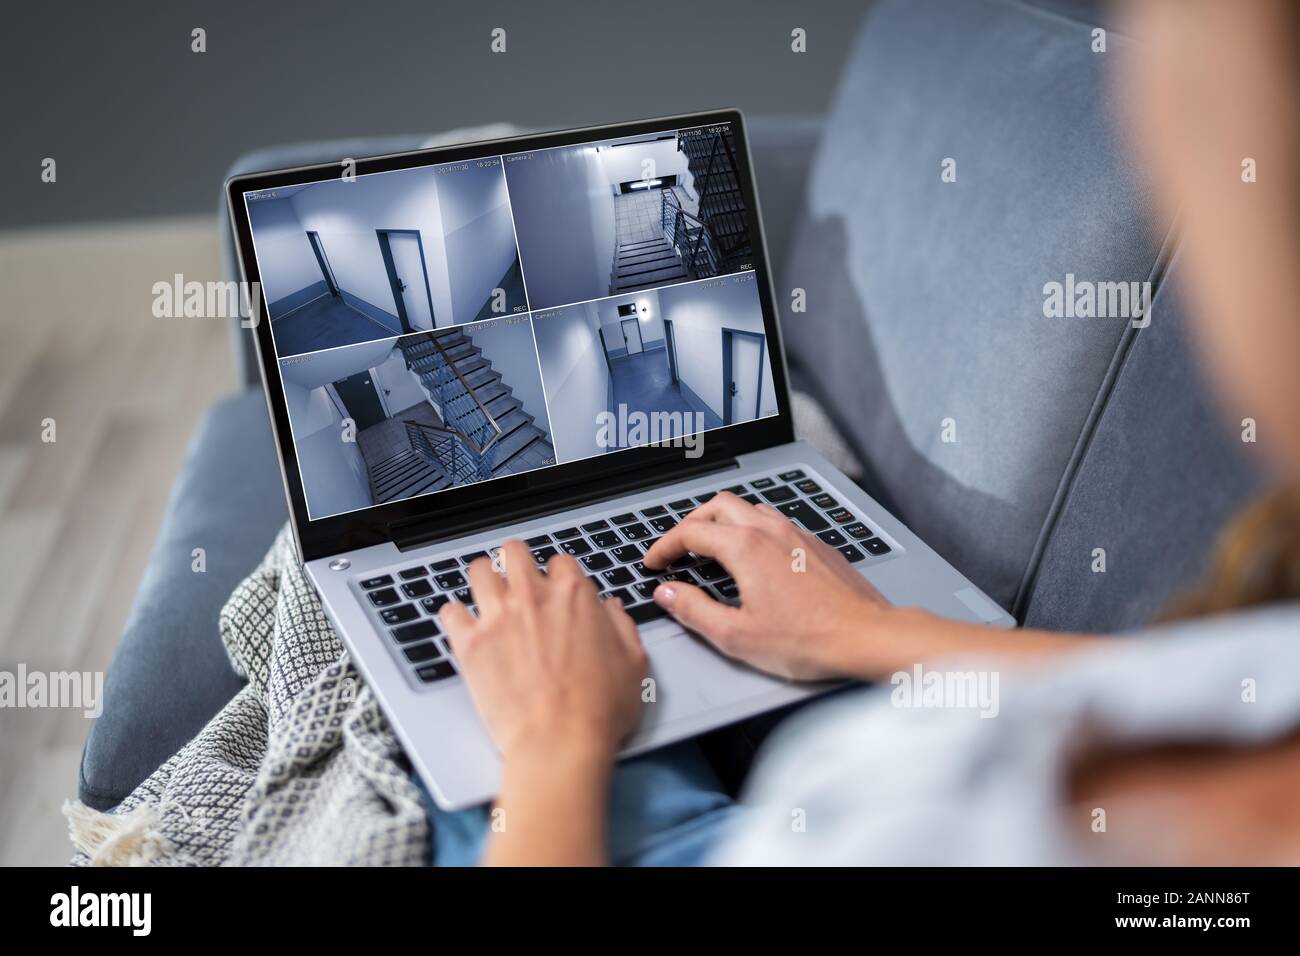 Close-up Of Woman Sitting On Couch Monitoring Home Security Cameras On Laptop At Home Stock Photo